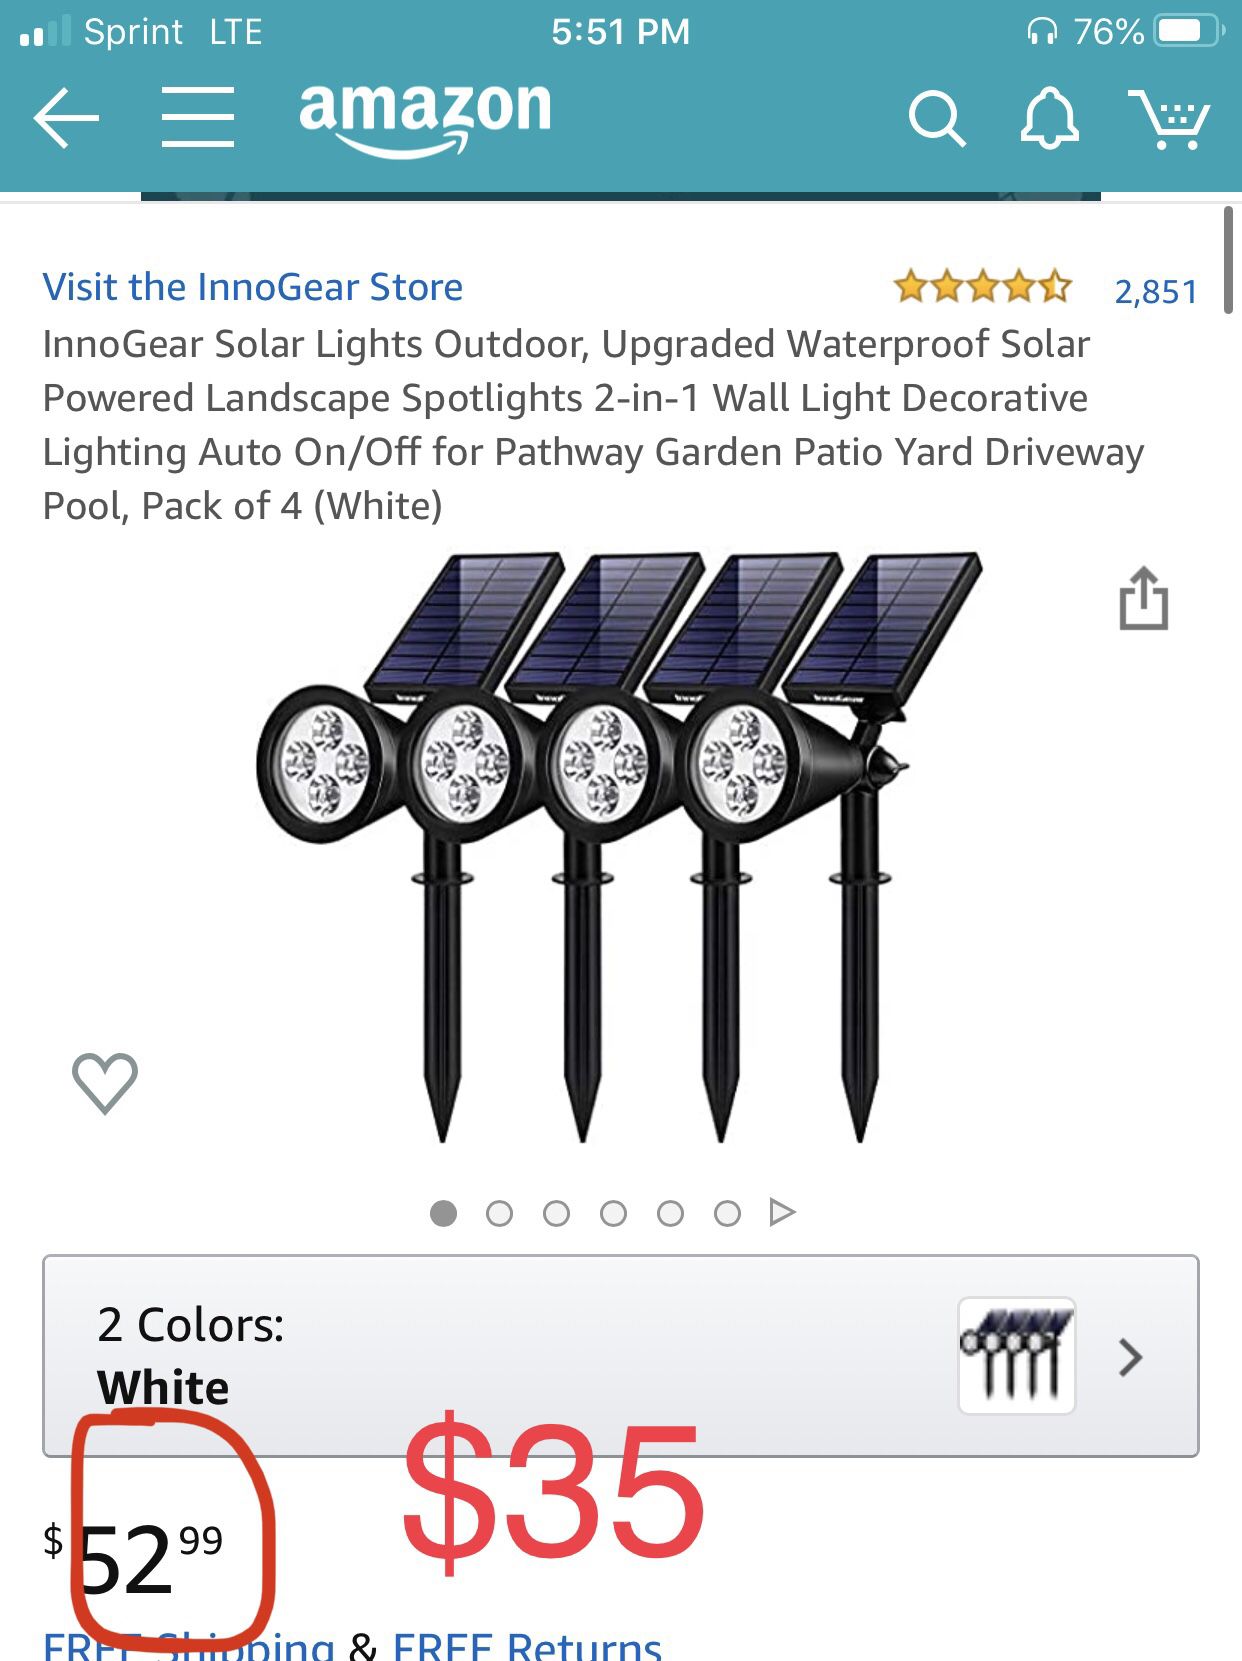 Solar Lights Outdoor, Upgraded Waterproof Solar Powered - Spotlights 2-in-1 ground and Wall (Set of 5)